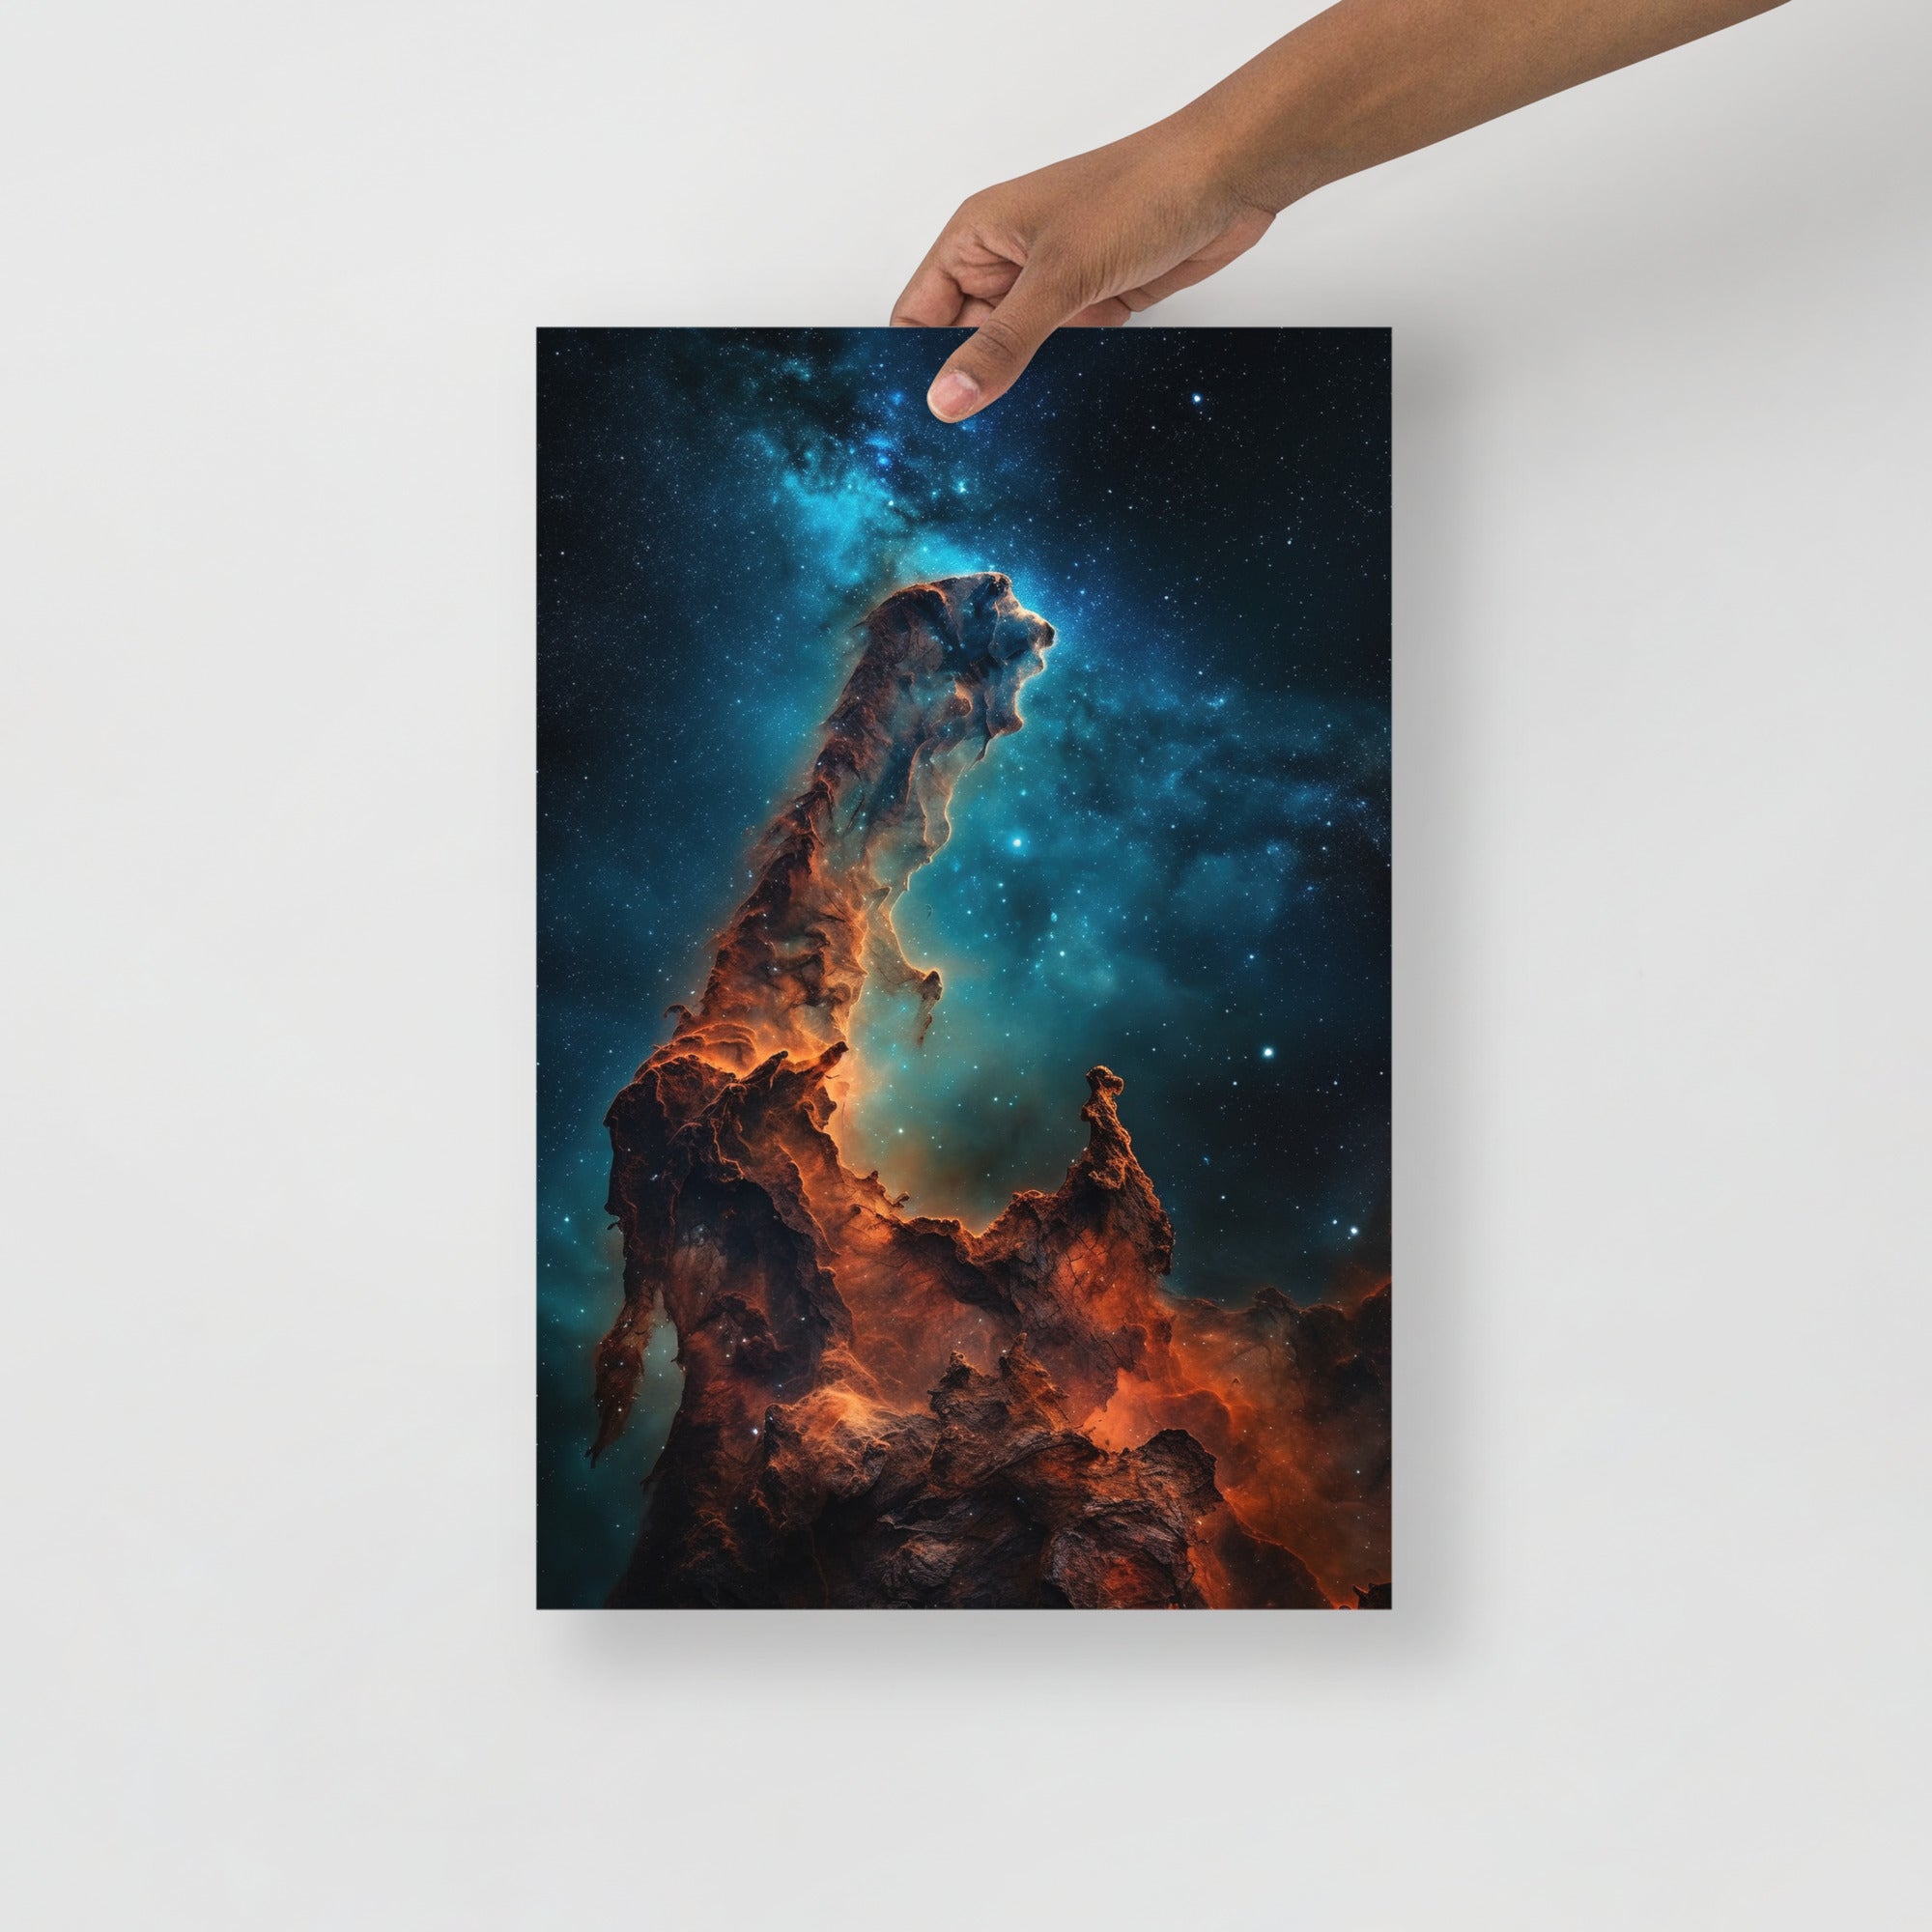 Stunning Pillars of Creation Space Art Poster by Visual Verse - Image 5